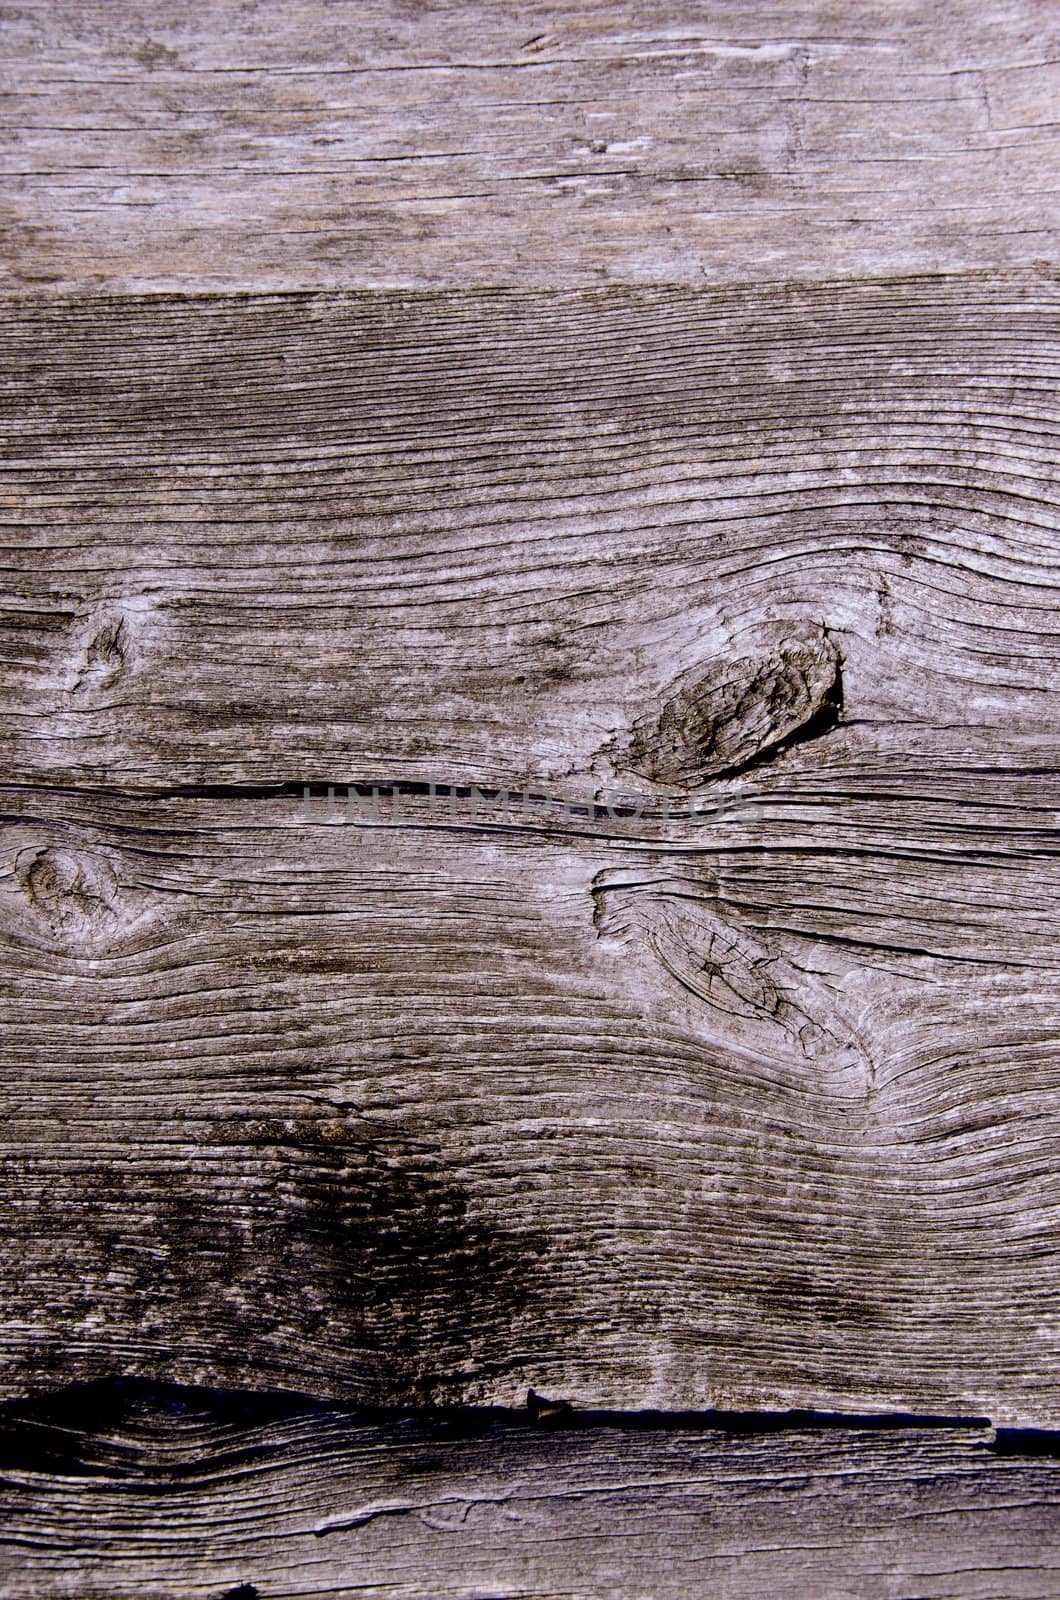 Old wooden wall fragment with interesting texture and surface background.